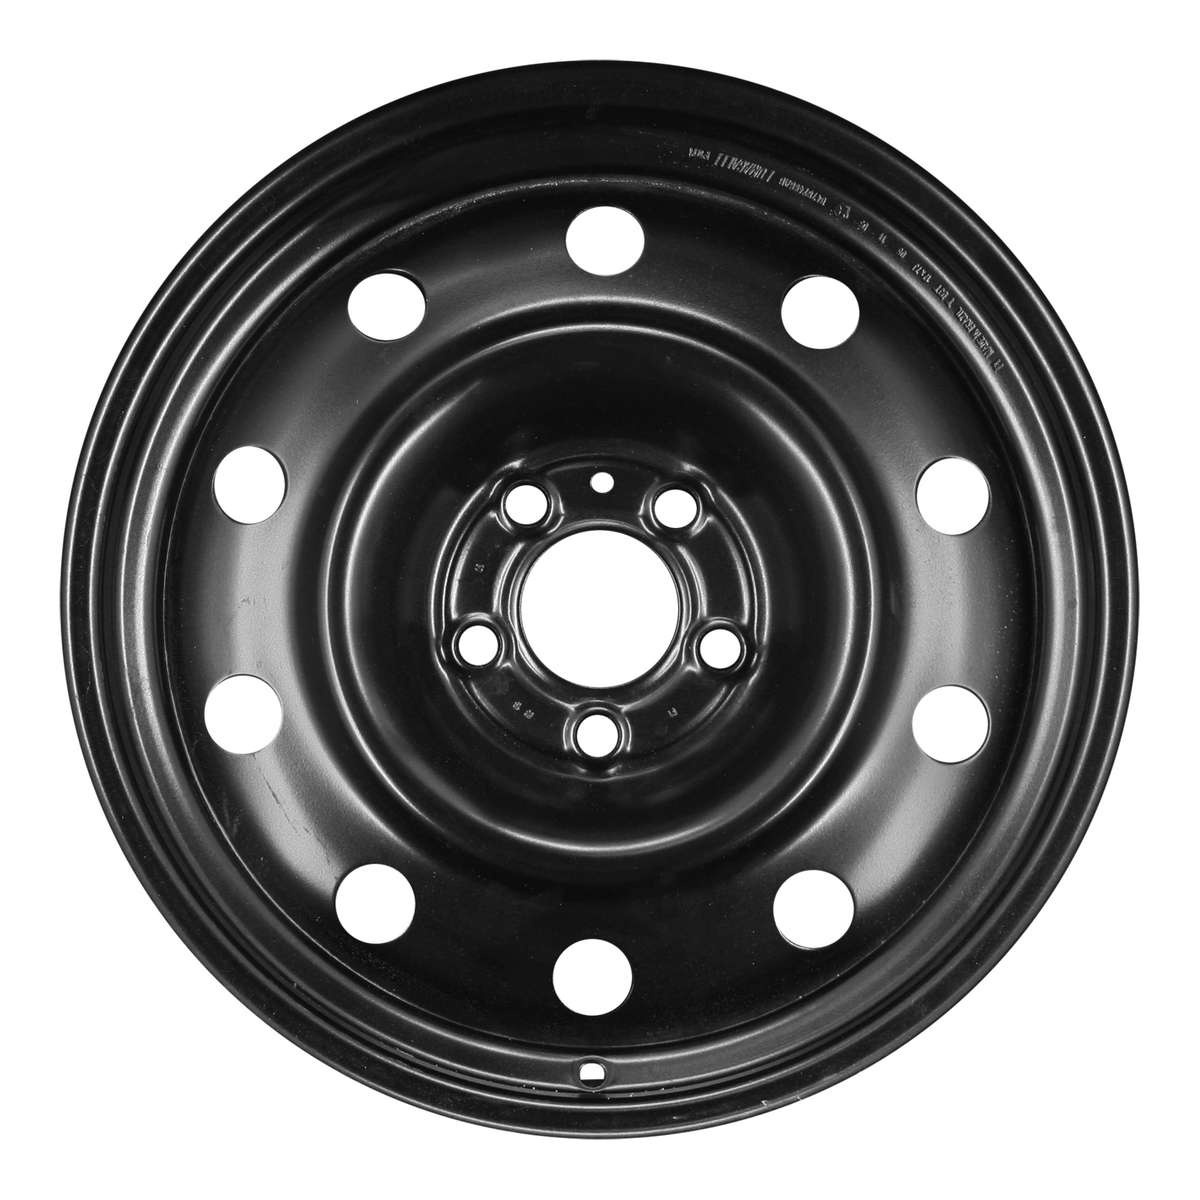 2009 Dodge Charger New 17" Replacement Wheel Rim RW2240B